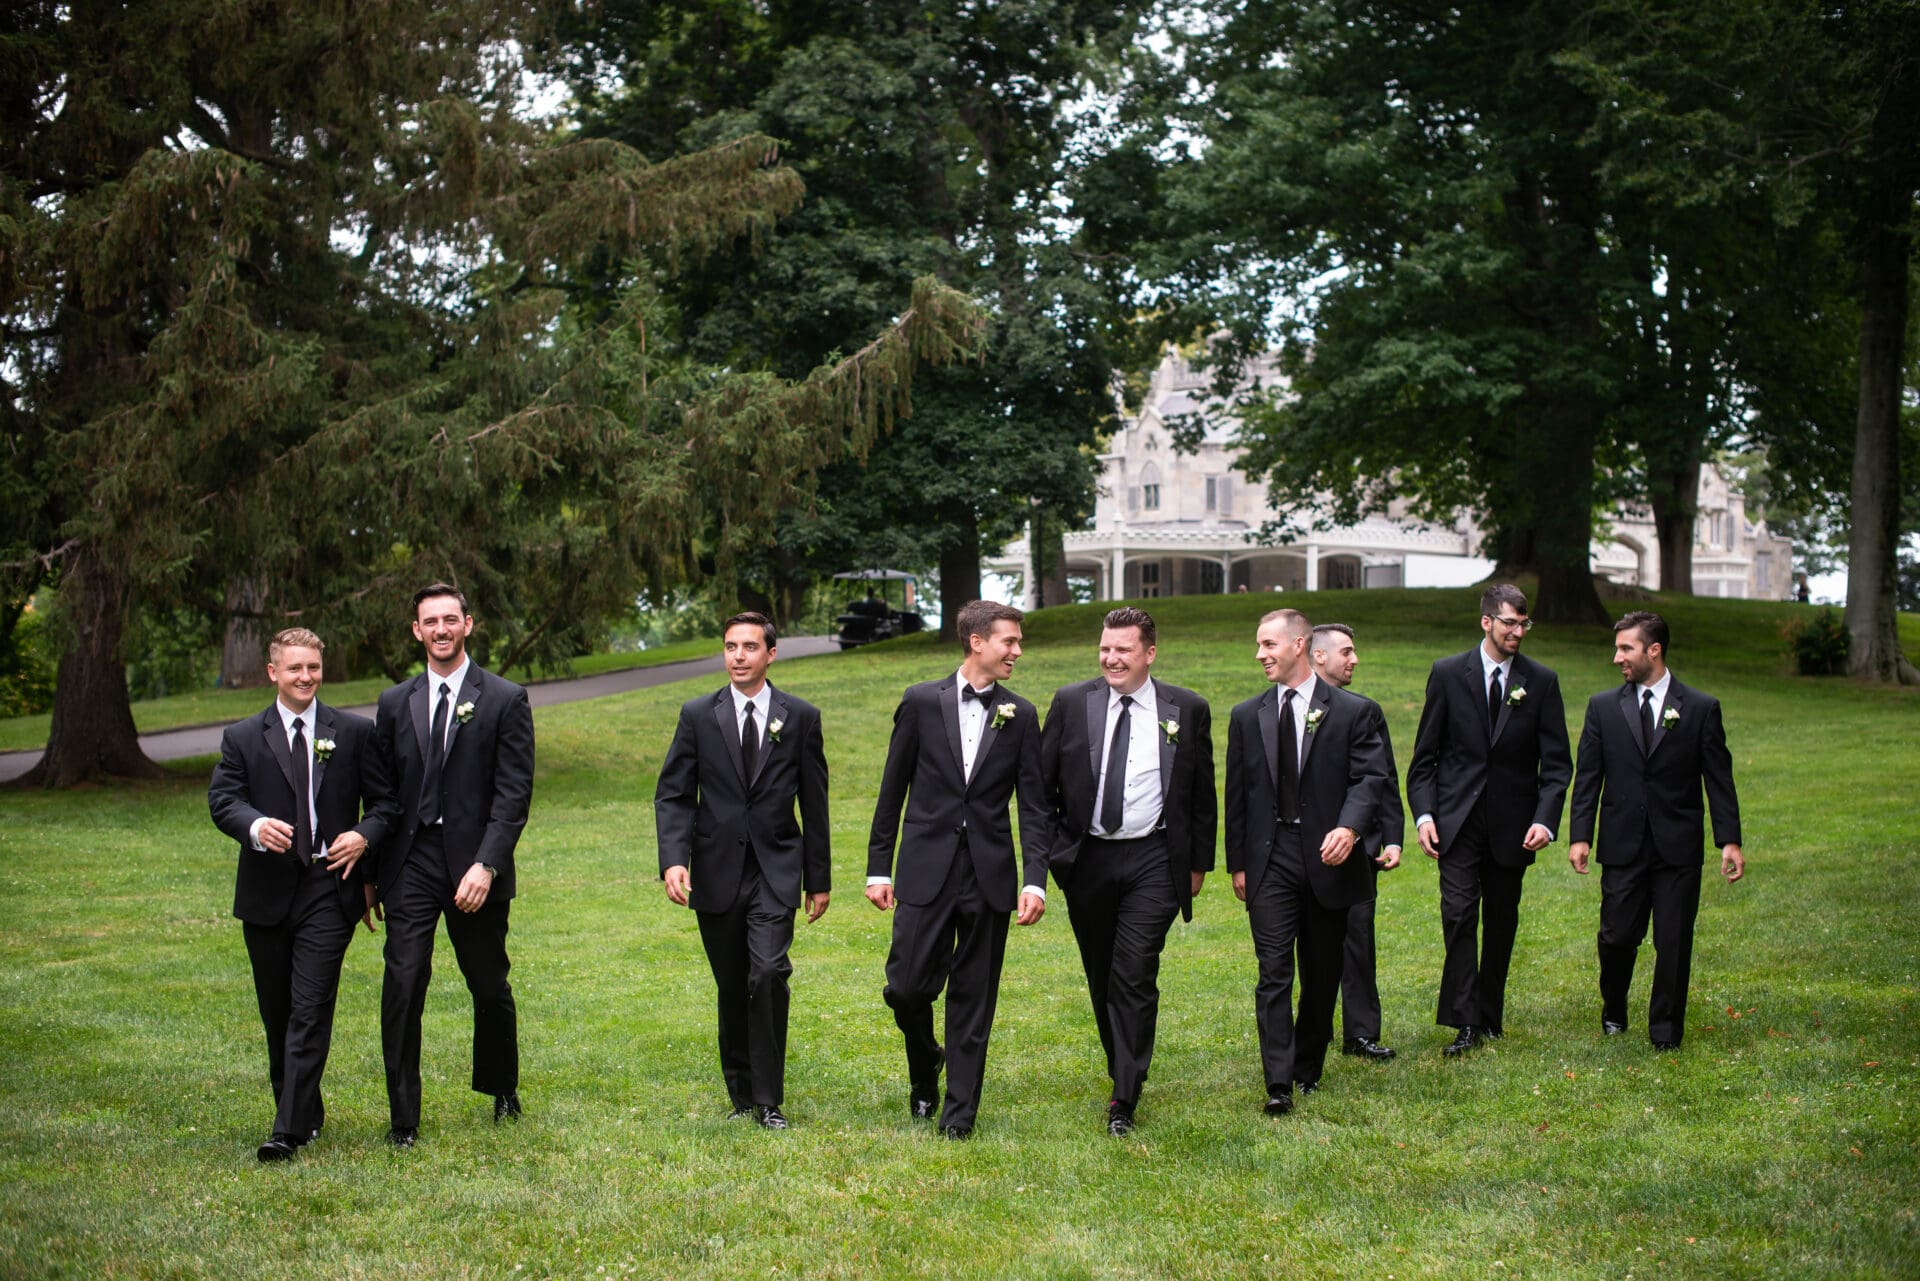 Groomsmen walking and laughing on the green lawn in front of Lyndhurst Castle